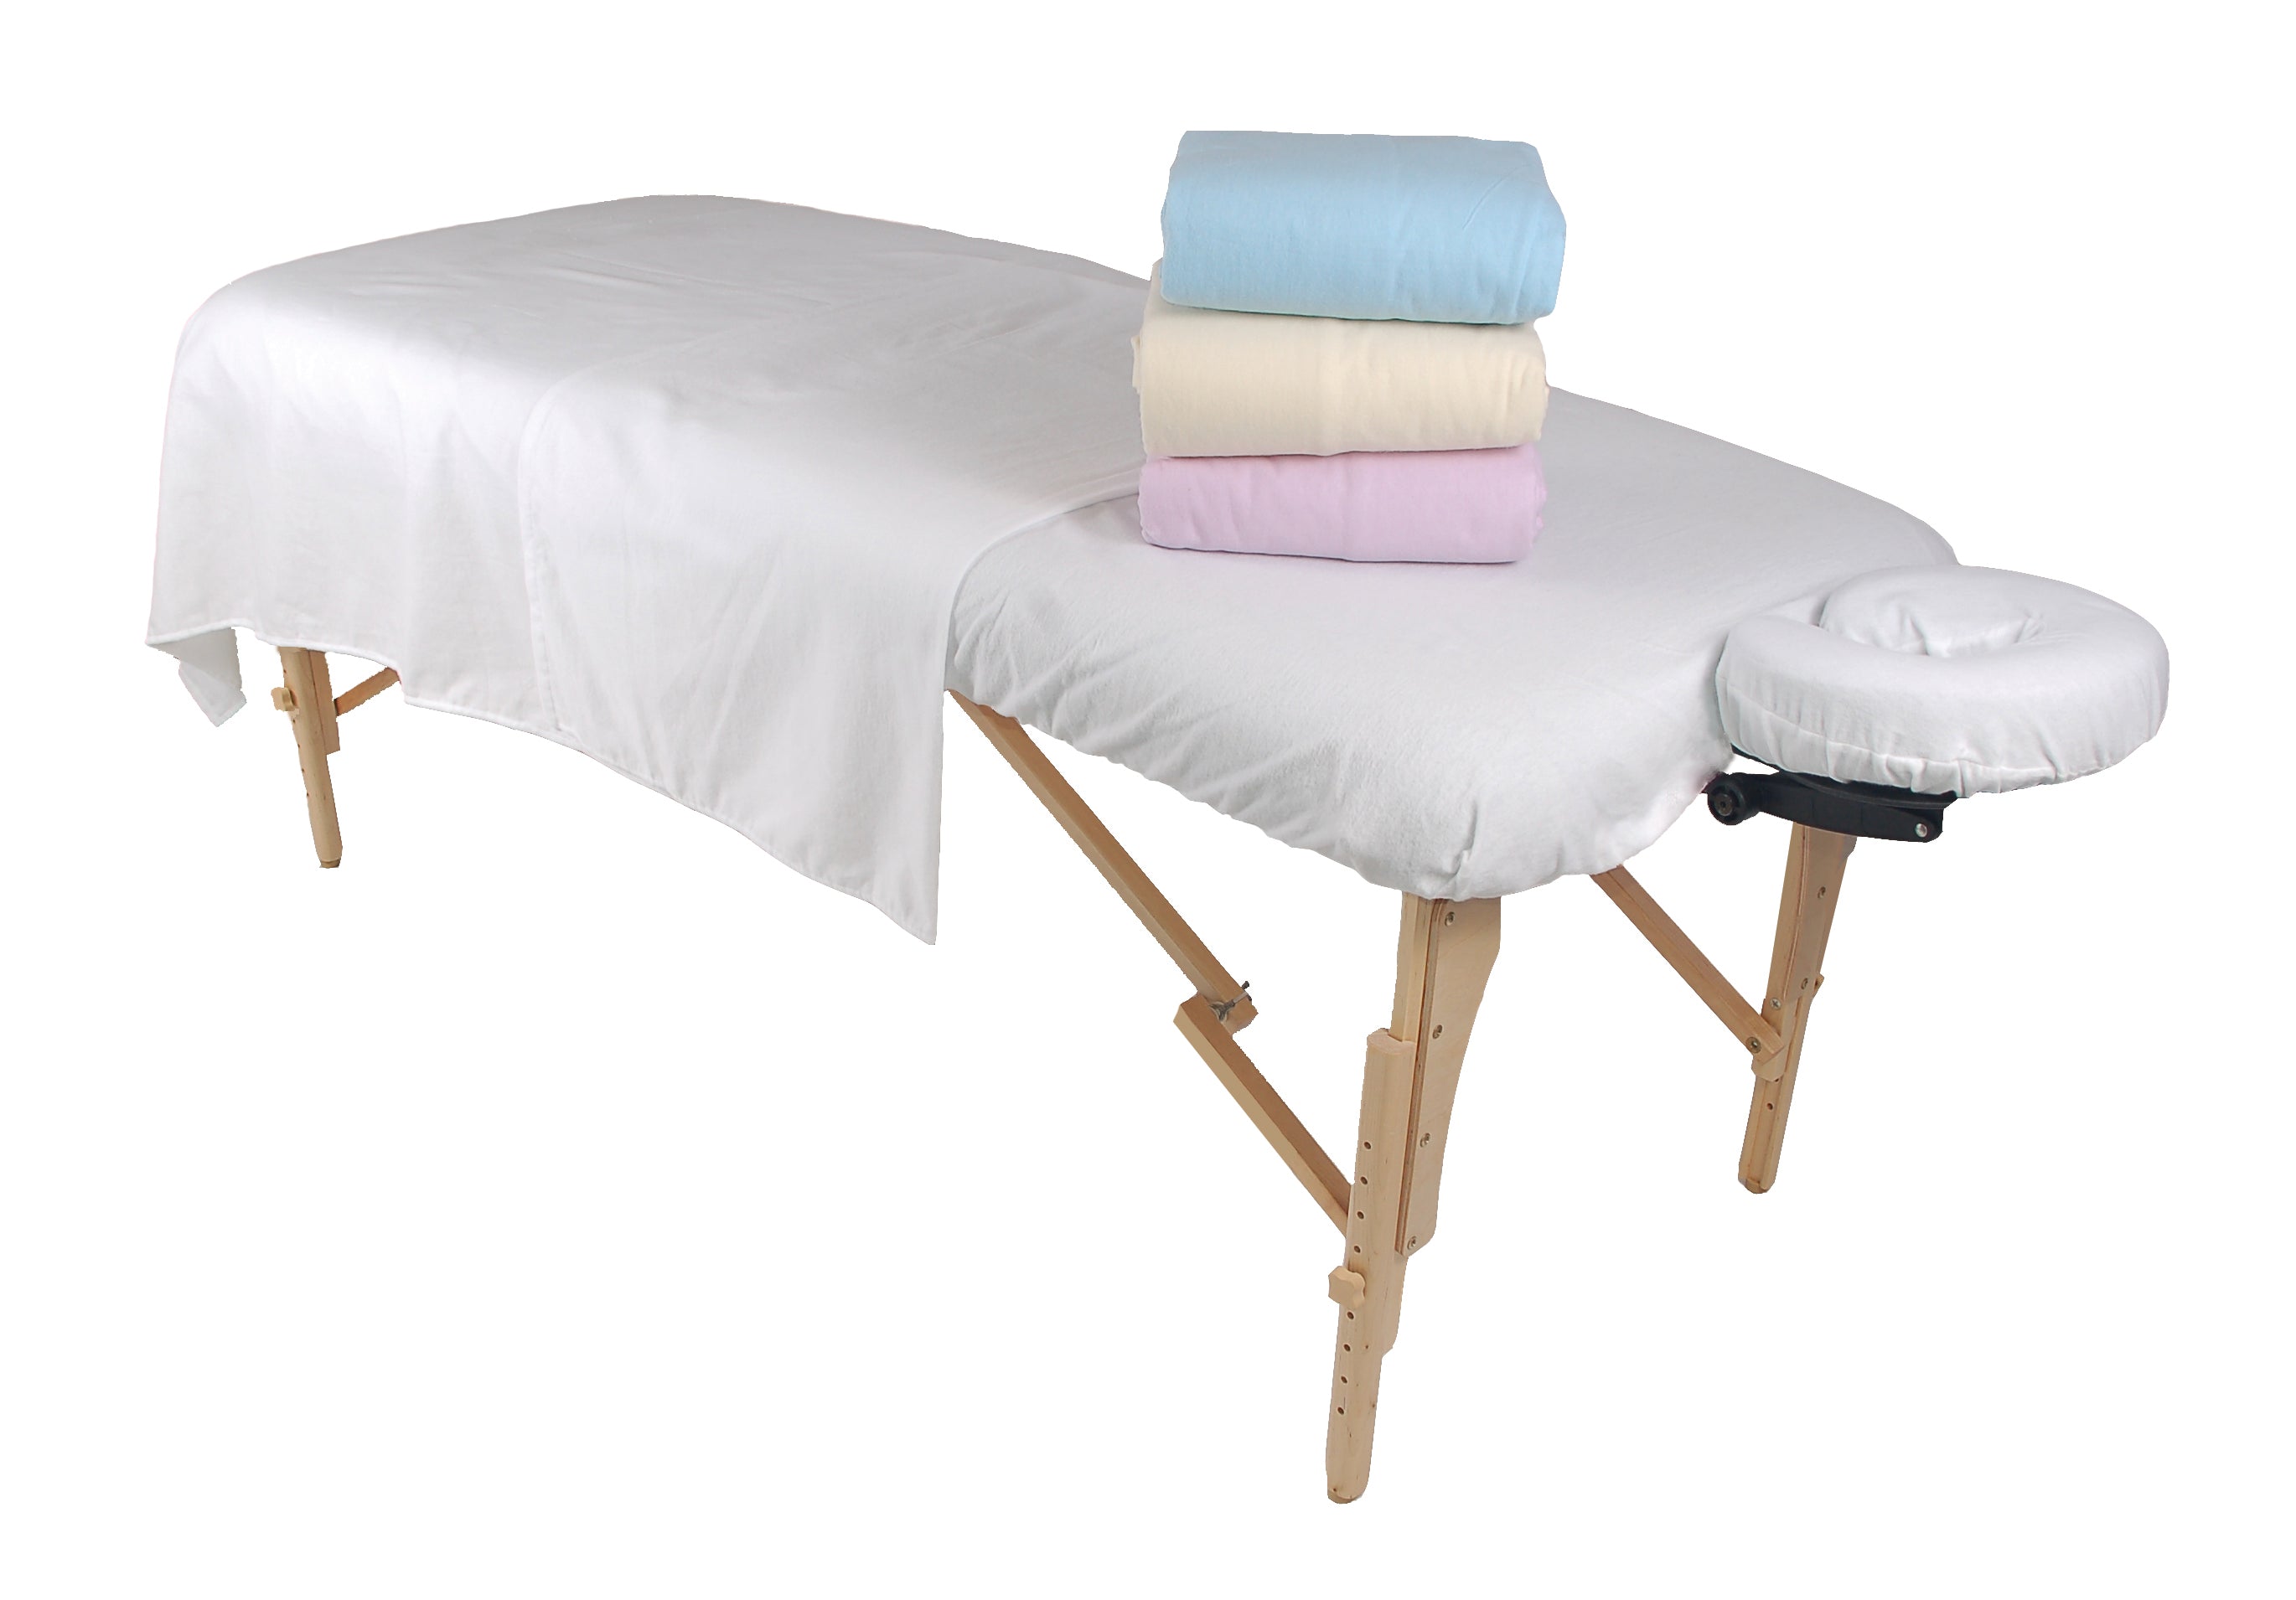 Flannel Massage Table Sheet - Fitted